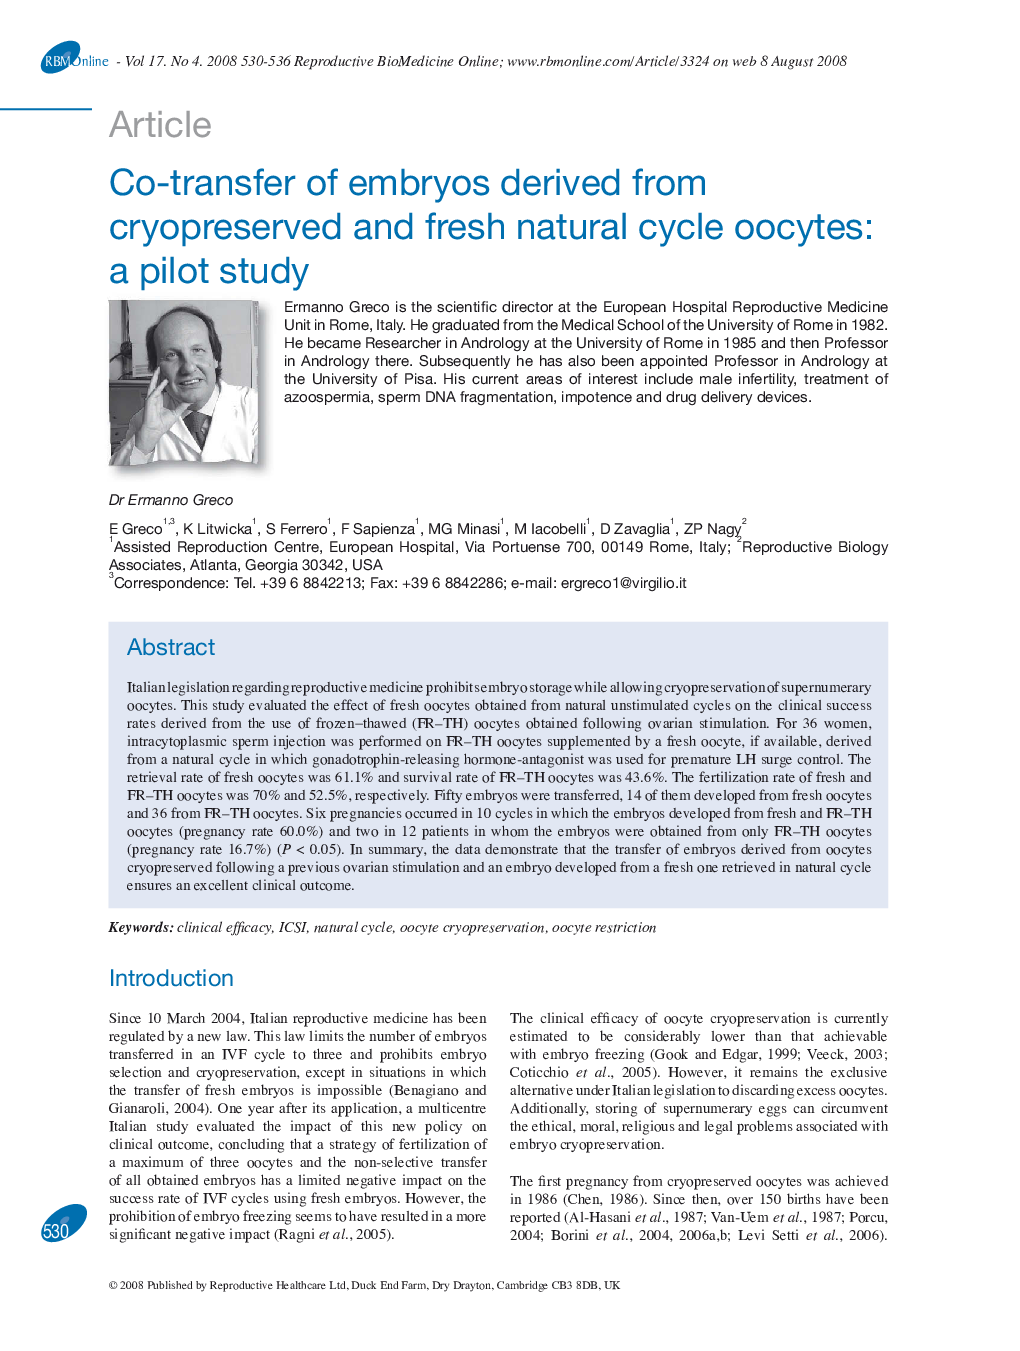 Co-transfer of embryos derived from cryopreserved and fresh natural cycle oocytes: a pilot study 